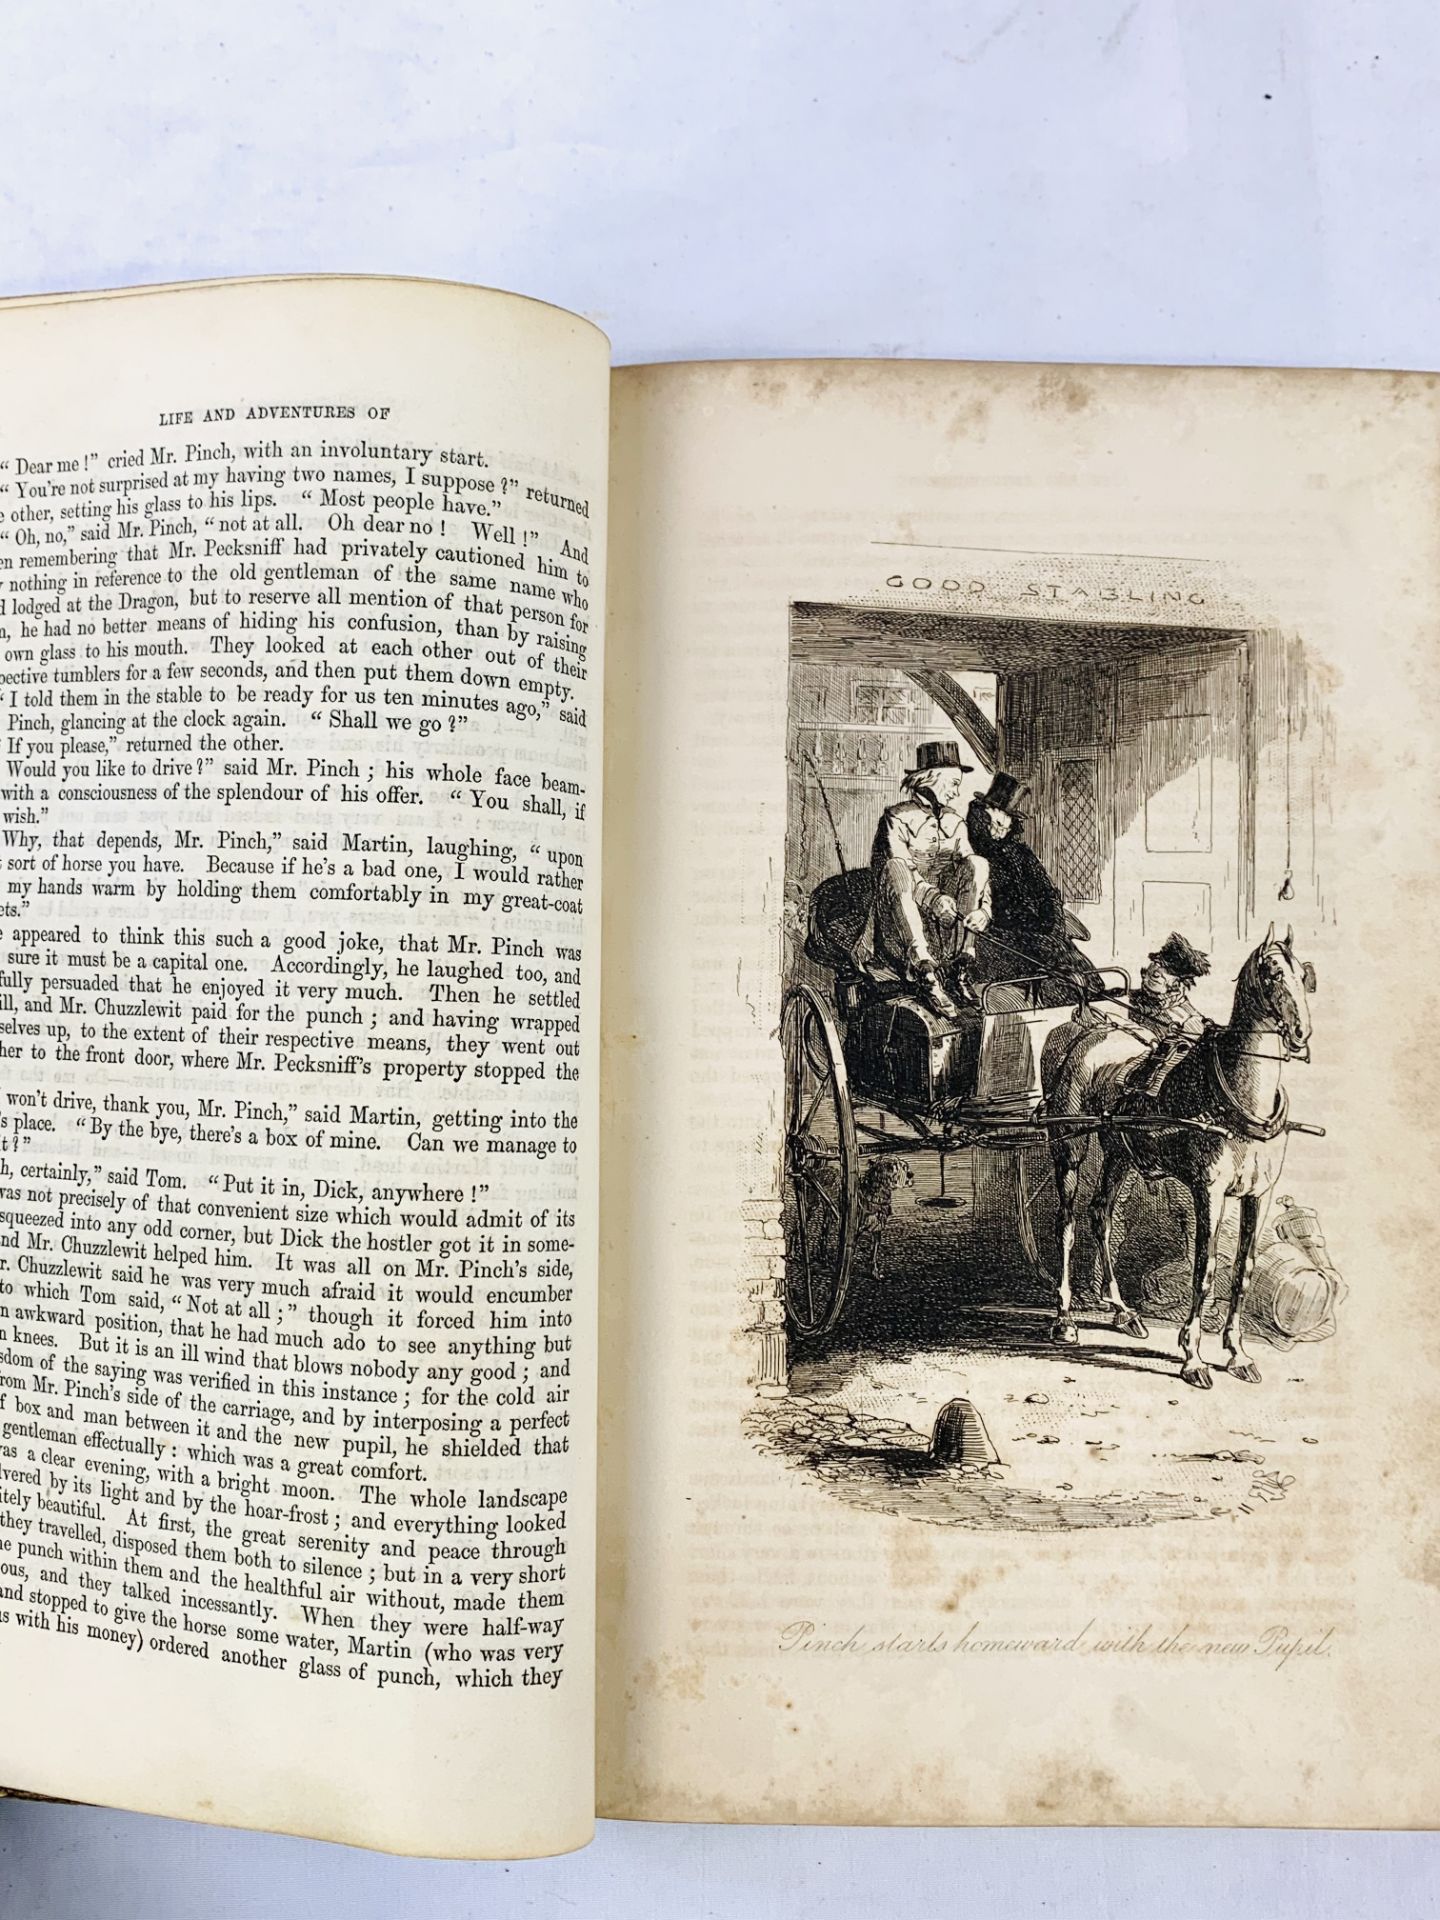 The Life and Adventures of Martin Chuzzlewit by Charles Dickens, Chapman & Hall 1844, 1st Edition. - Image 4 of 6